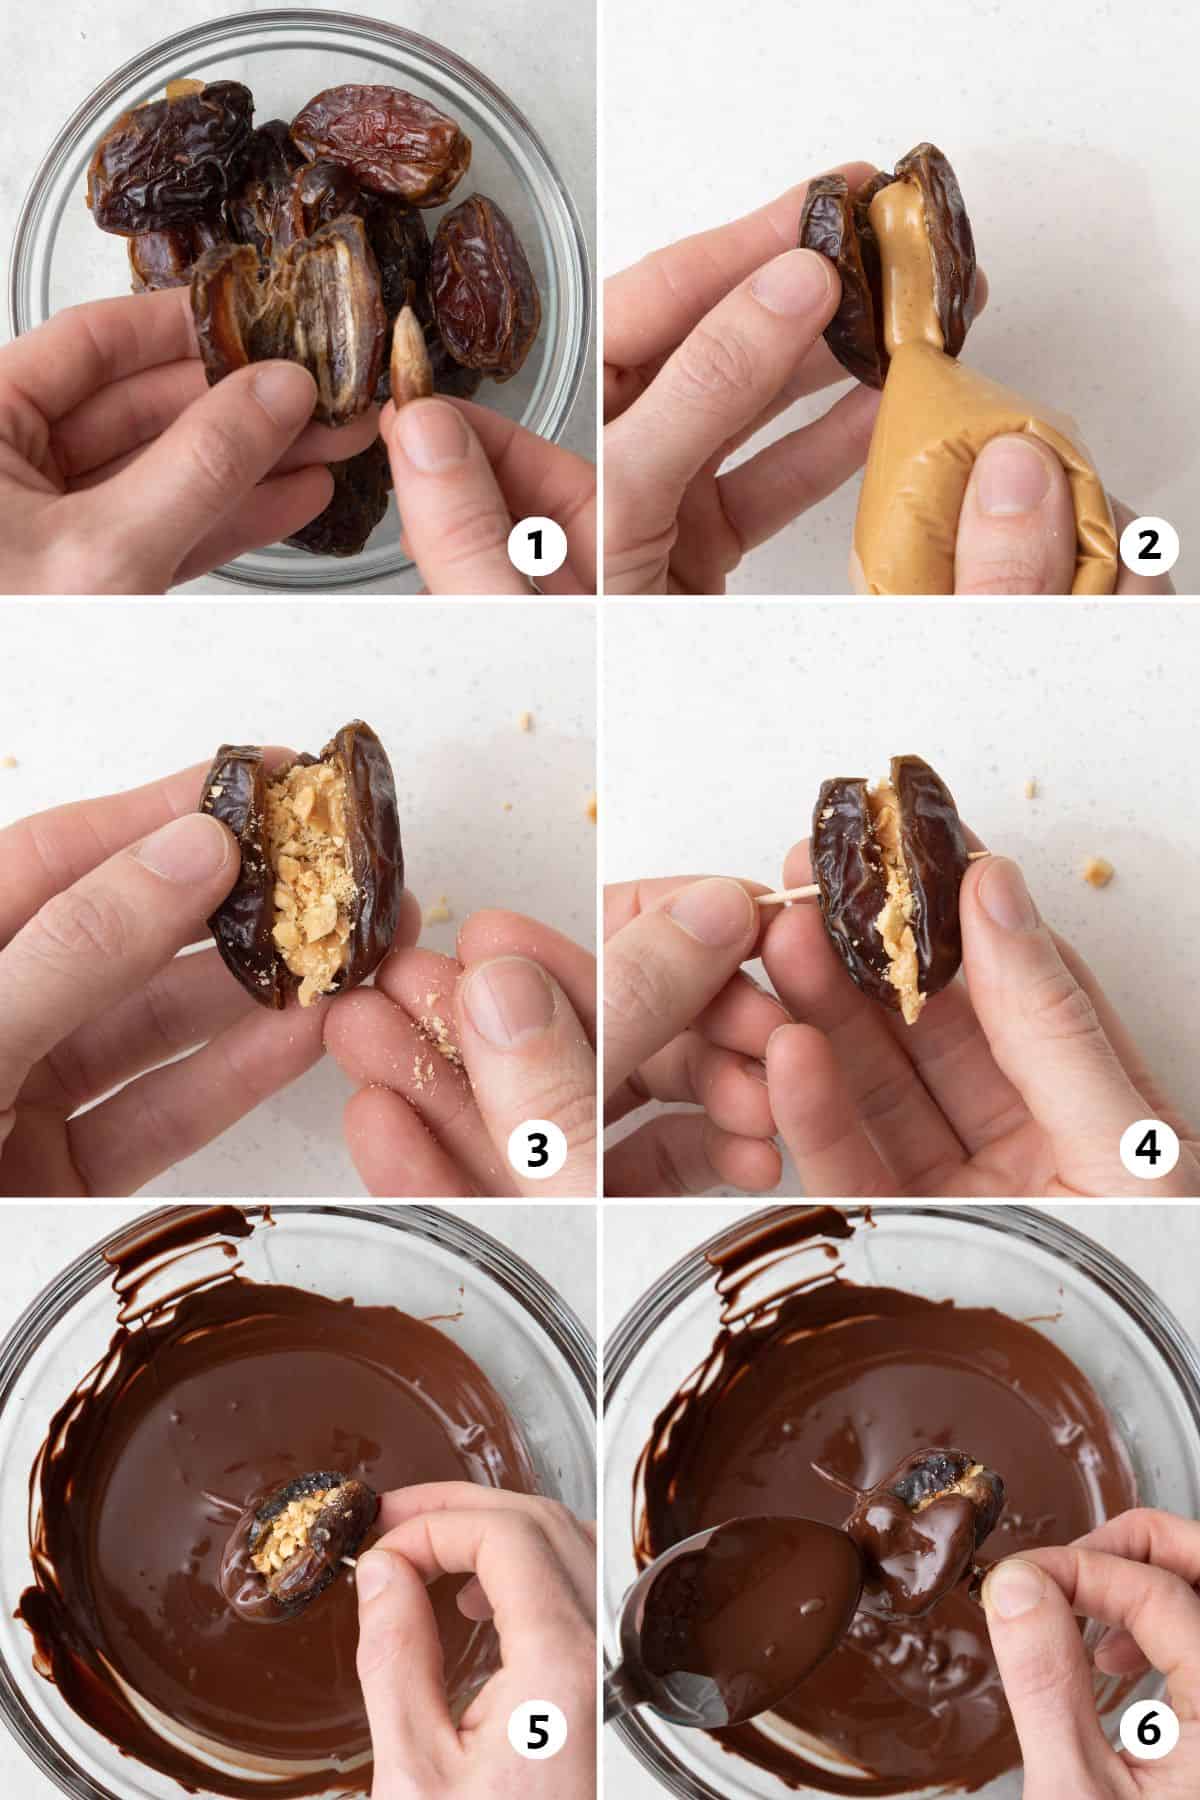 6 image collage making recipe: 1- removing pit from date, 2- piping peanut butter into a pitted date, 3- added crushed peanuts, 4- piercing date with a toothpick, 5- dipping into chocolate, 6- pouring chocolate over top.